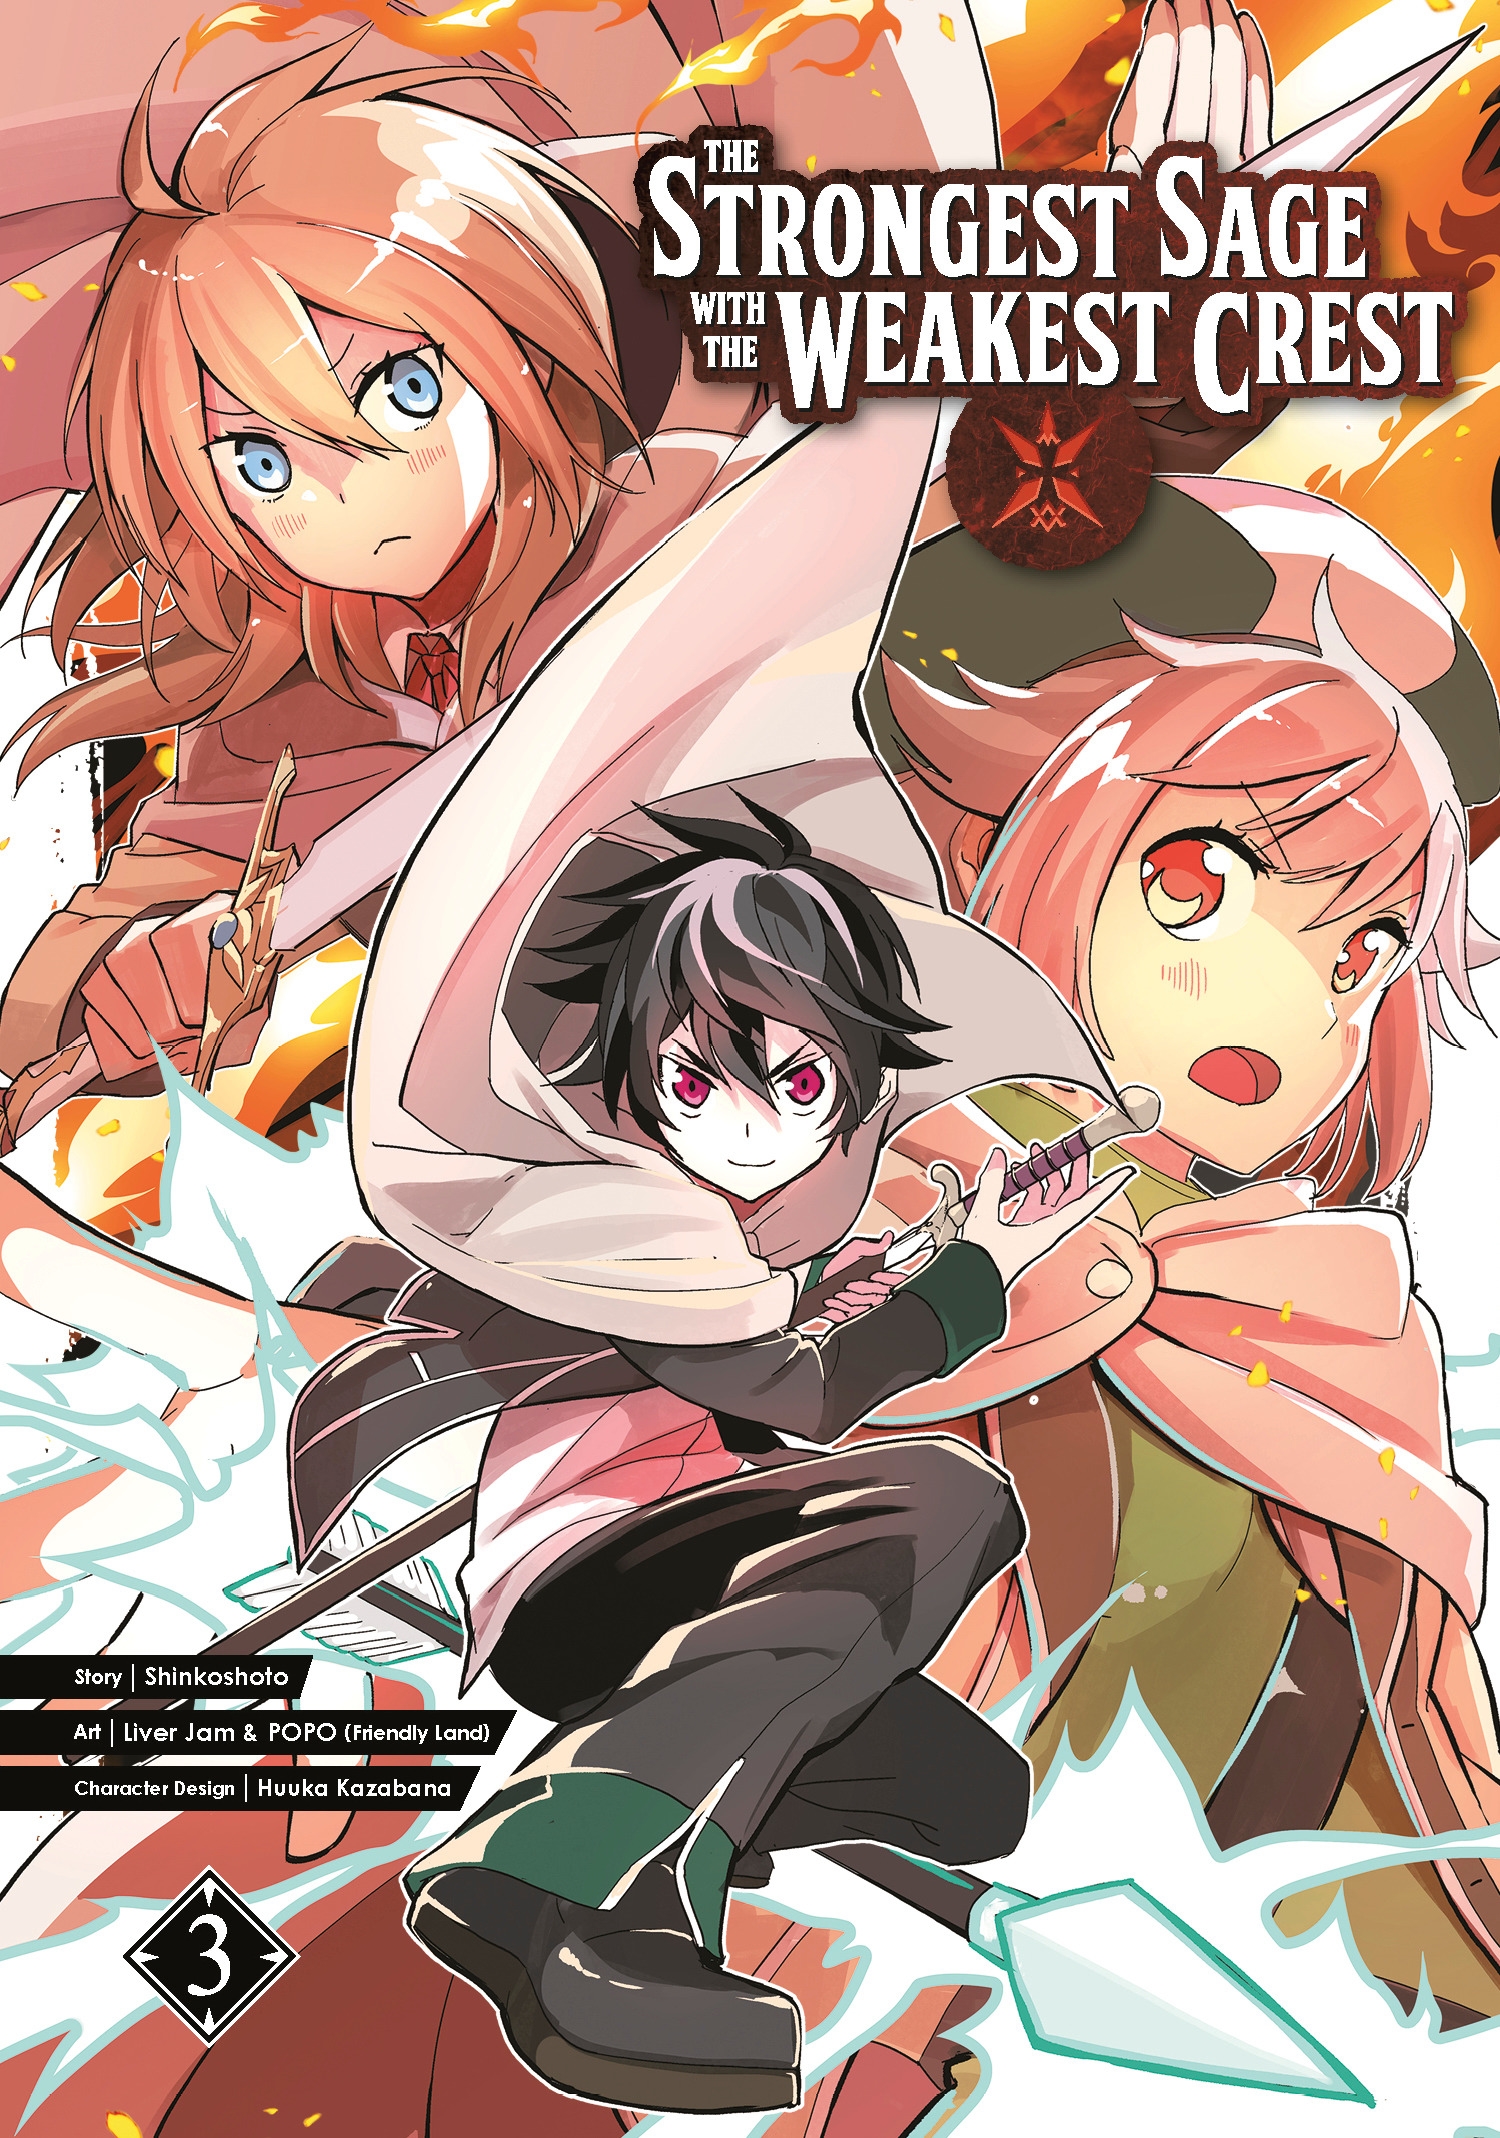 The Strongest Sage with the Weakest Crest 3 by Shinkoshoto - Penguin